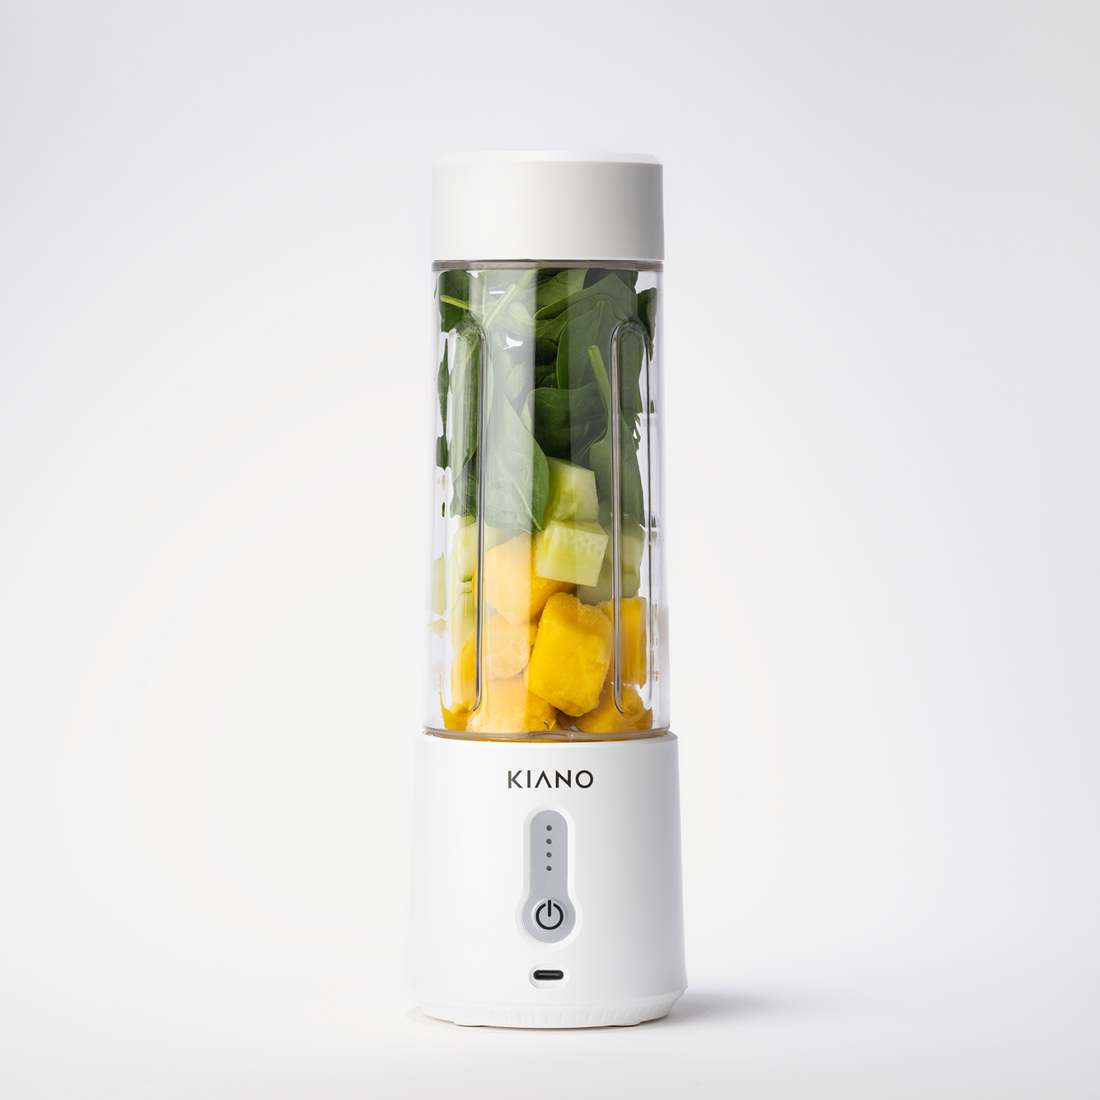 KIANO's Portable Blender: Making Healthy Eating Easy and Accessible